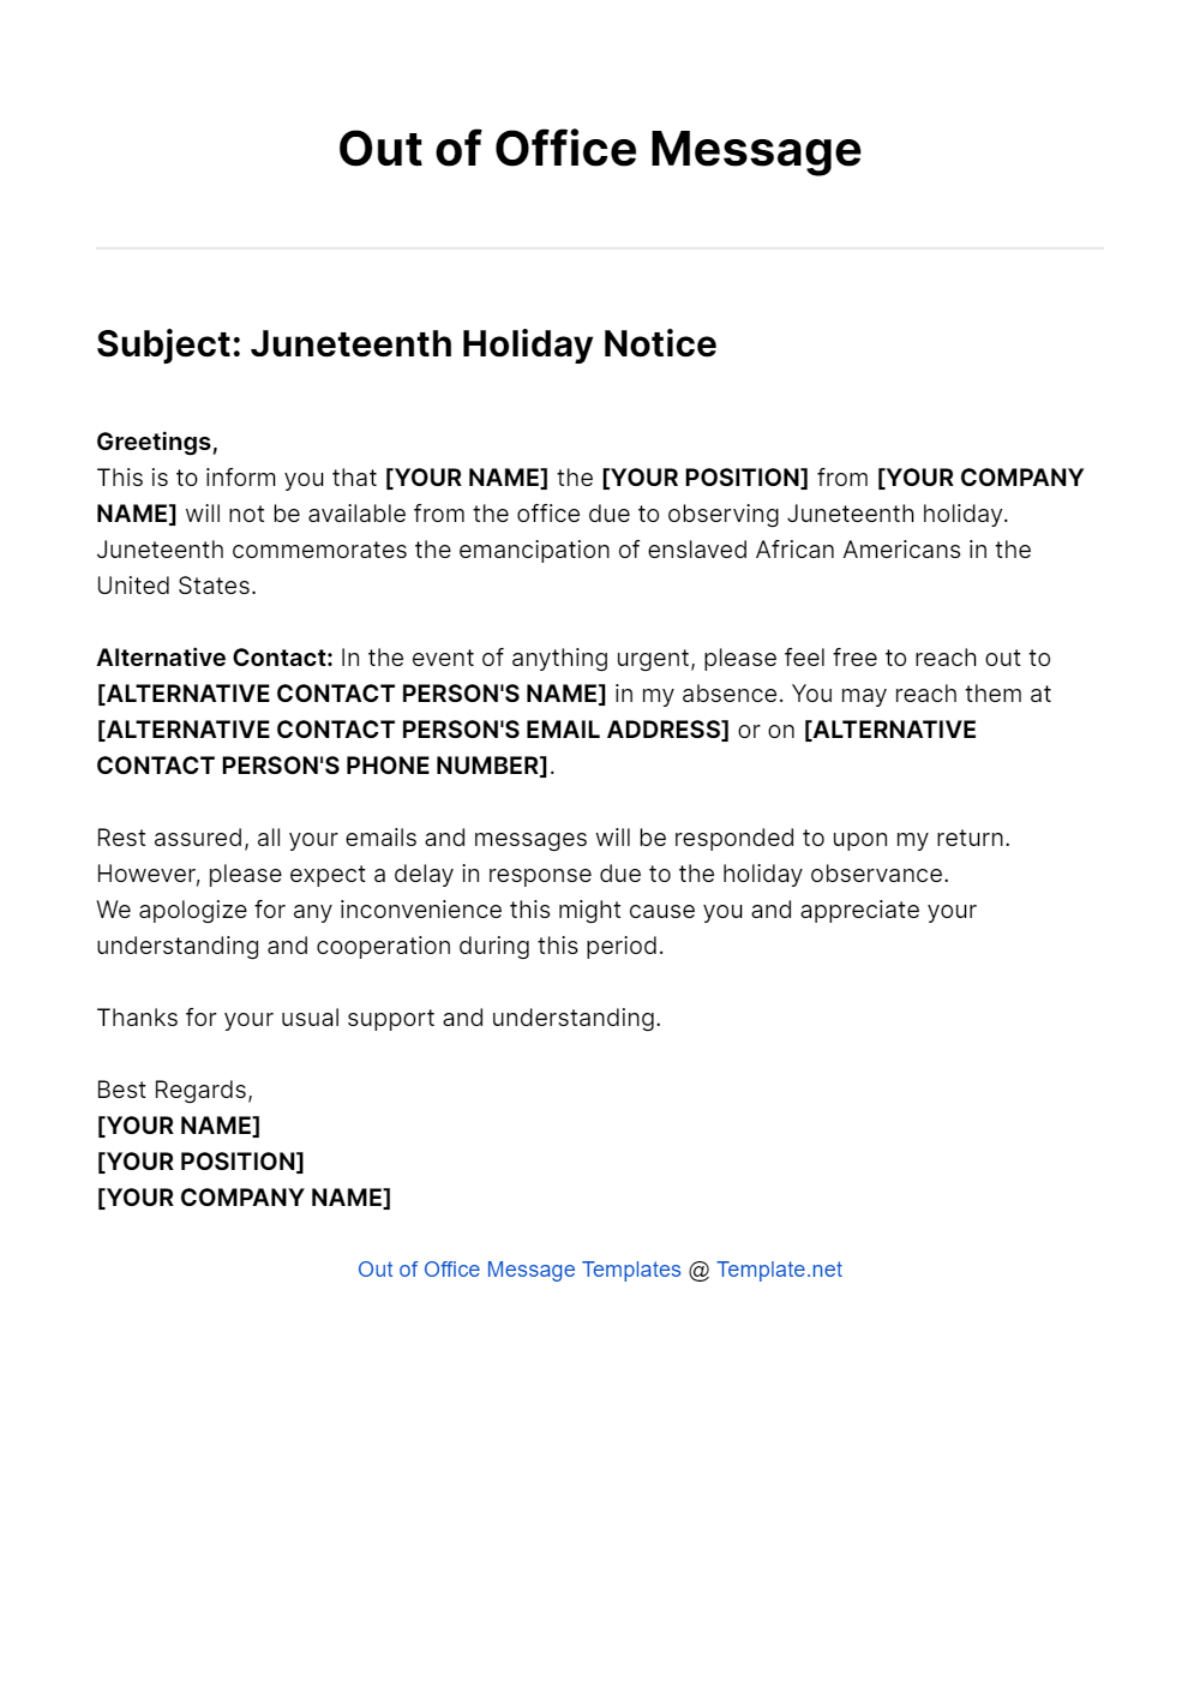 Free Juneteenth Holiday Out Of Office Message Template